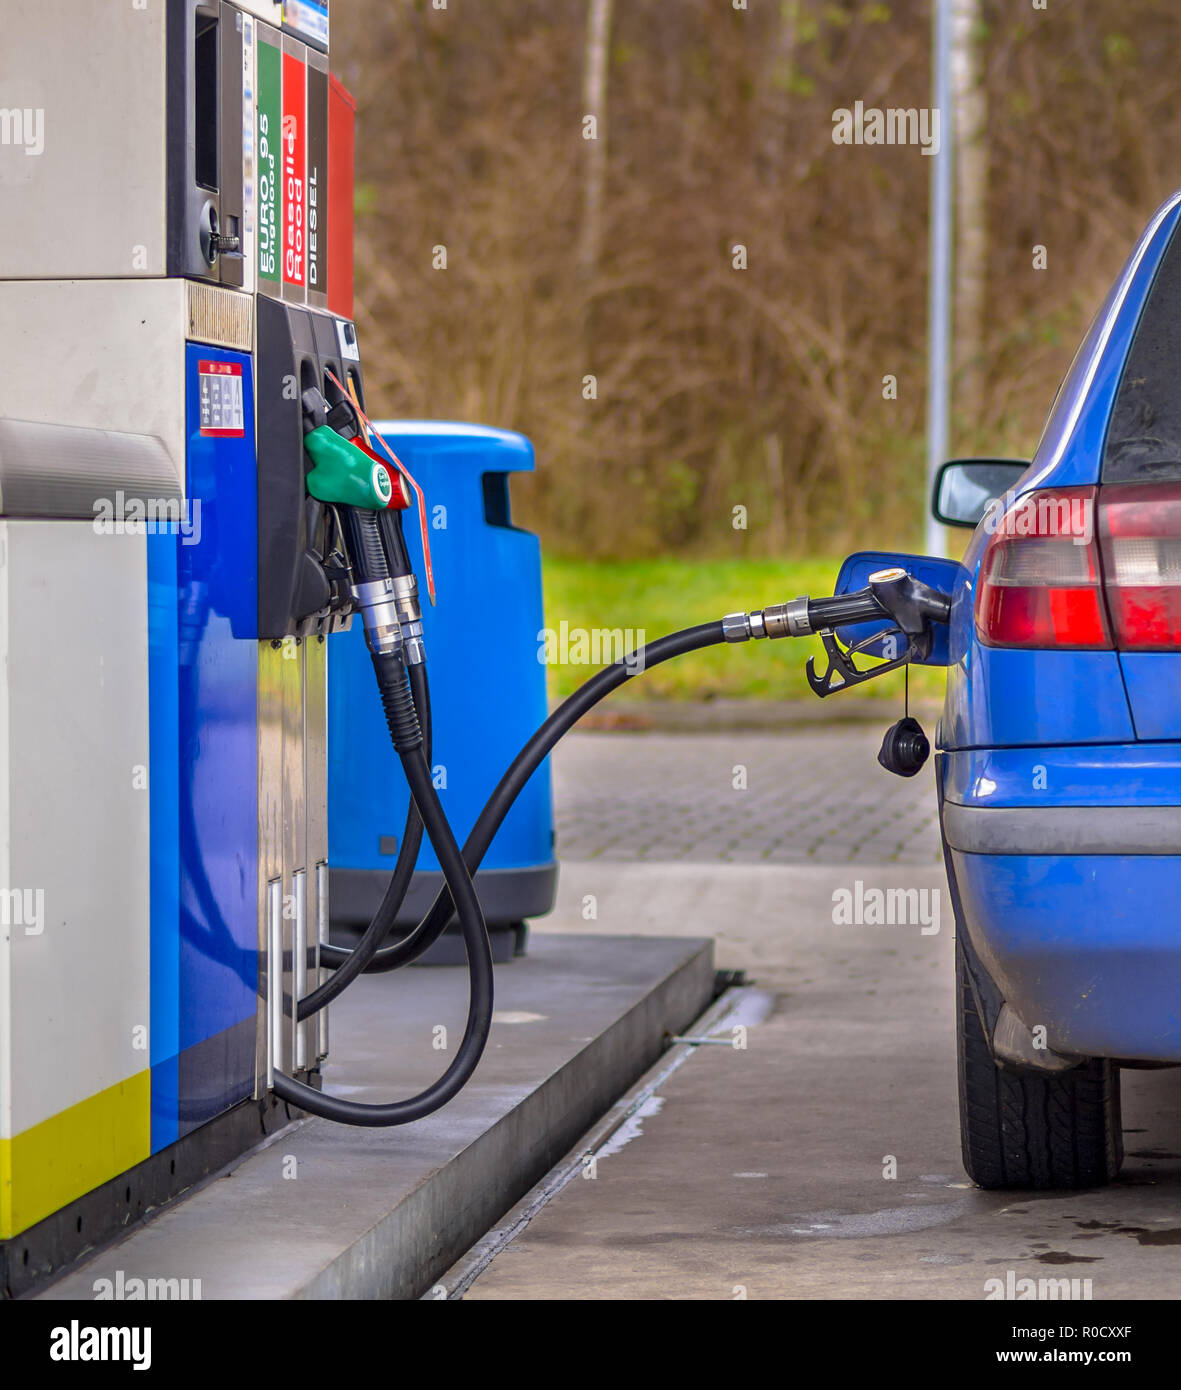 Blue car filling up with fuel at the gas station against inflated prices Stock Photo